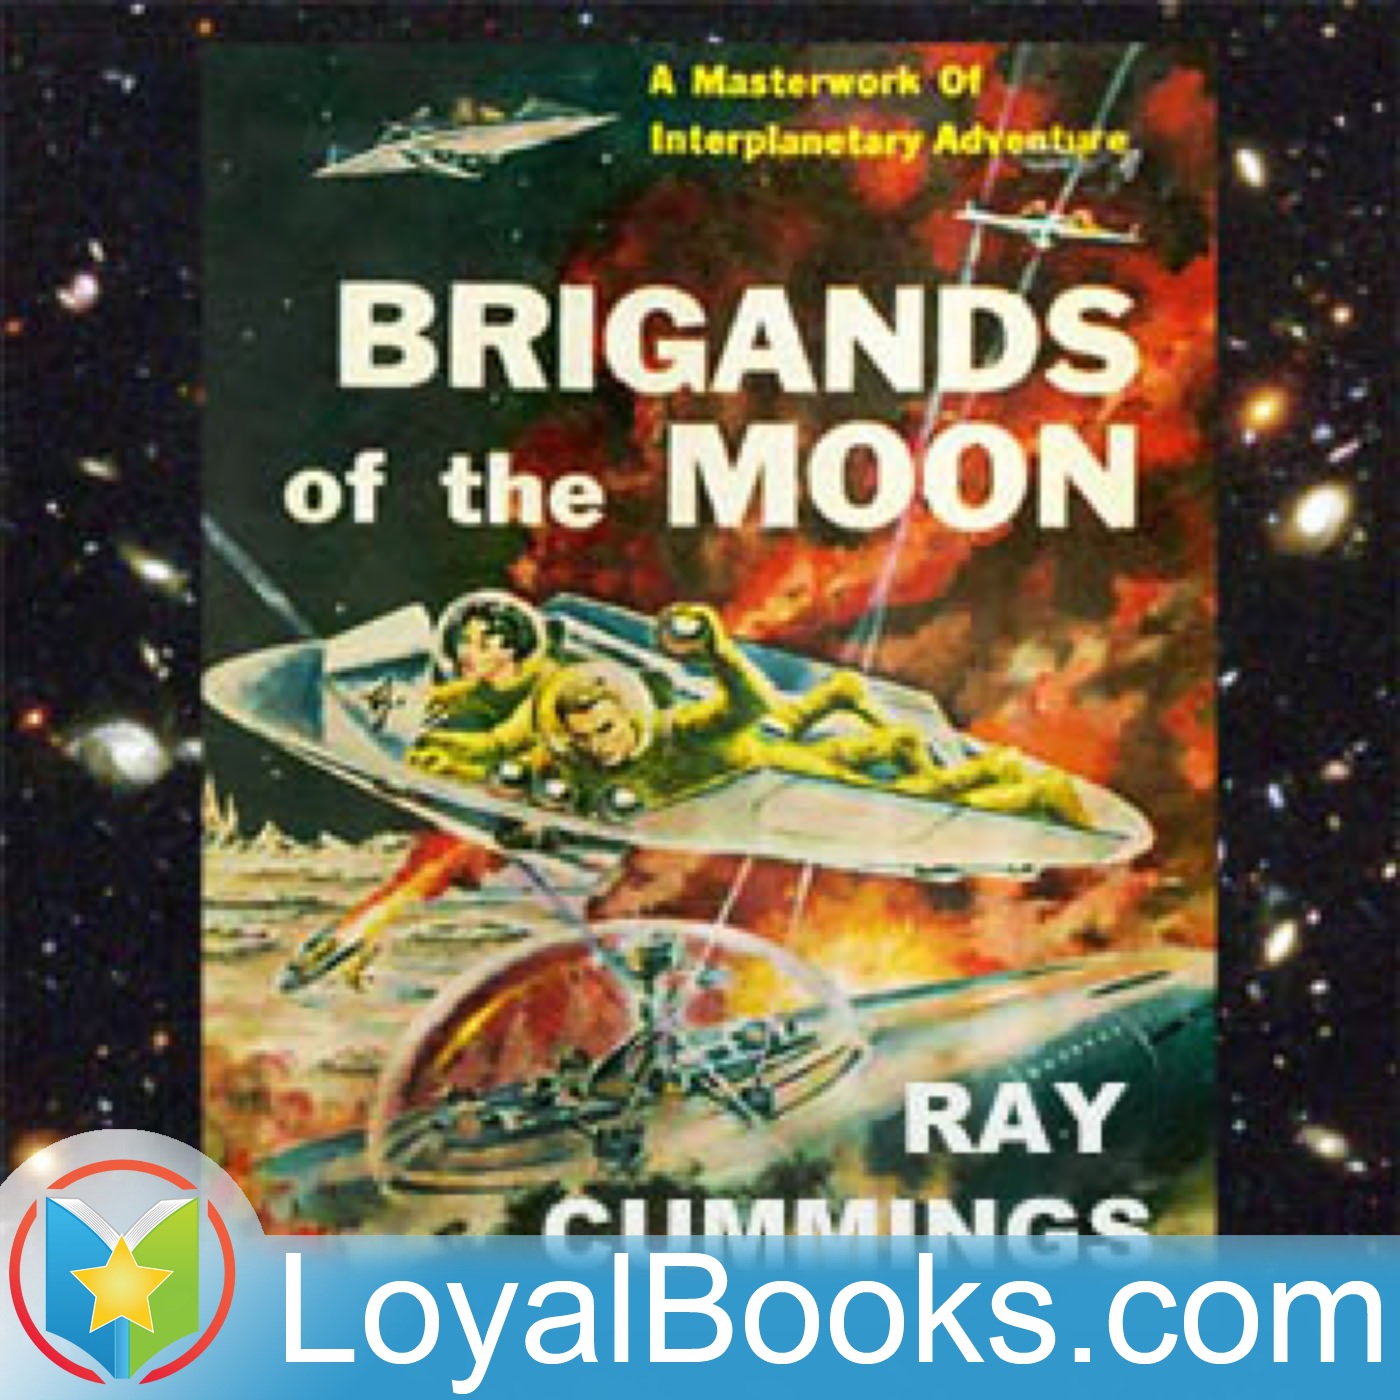 Brigands of the Moon by Ray Cummings:Loyal Books